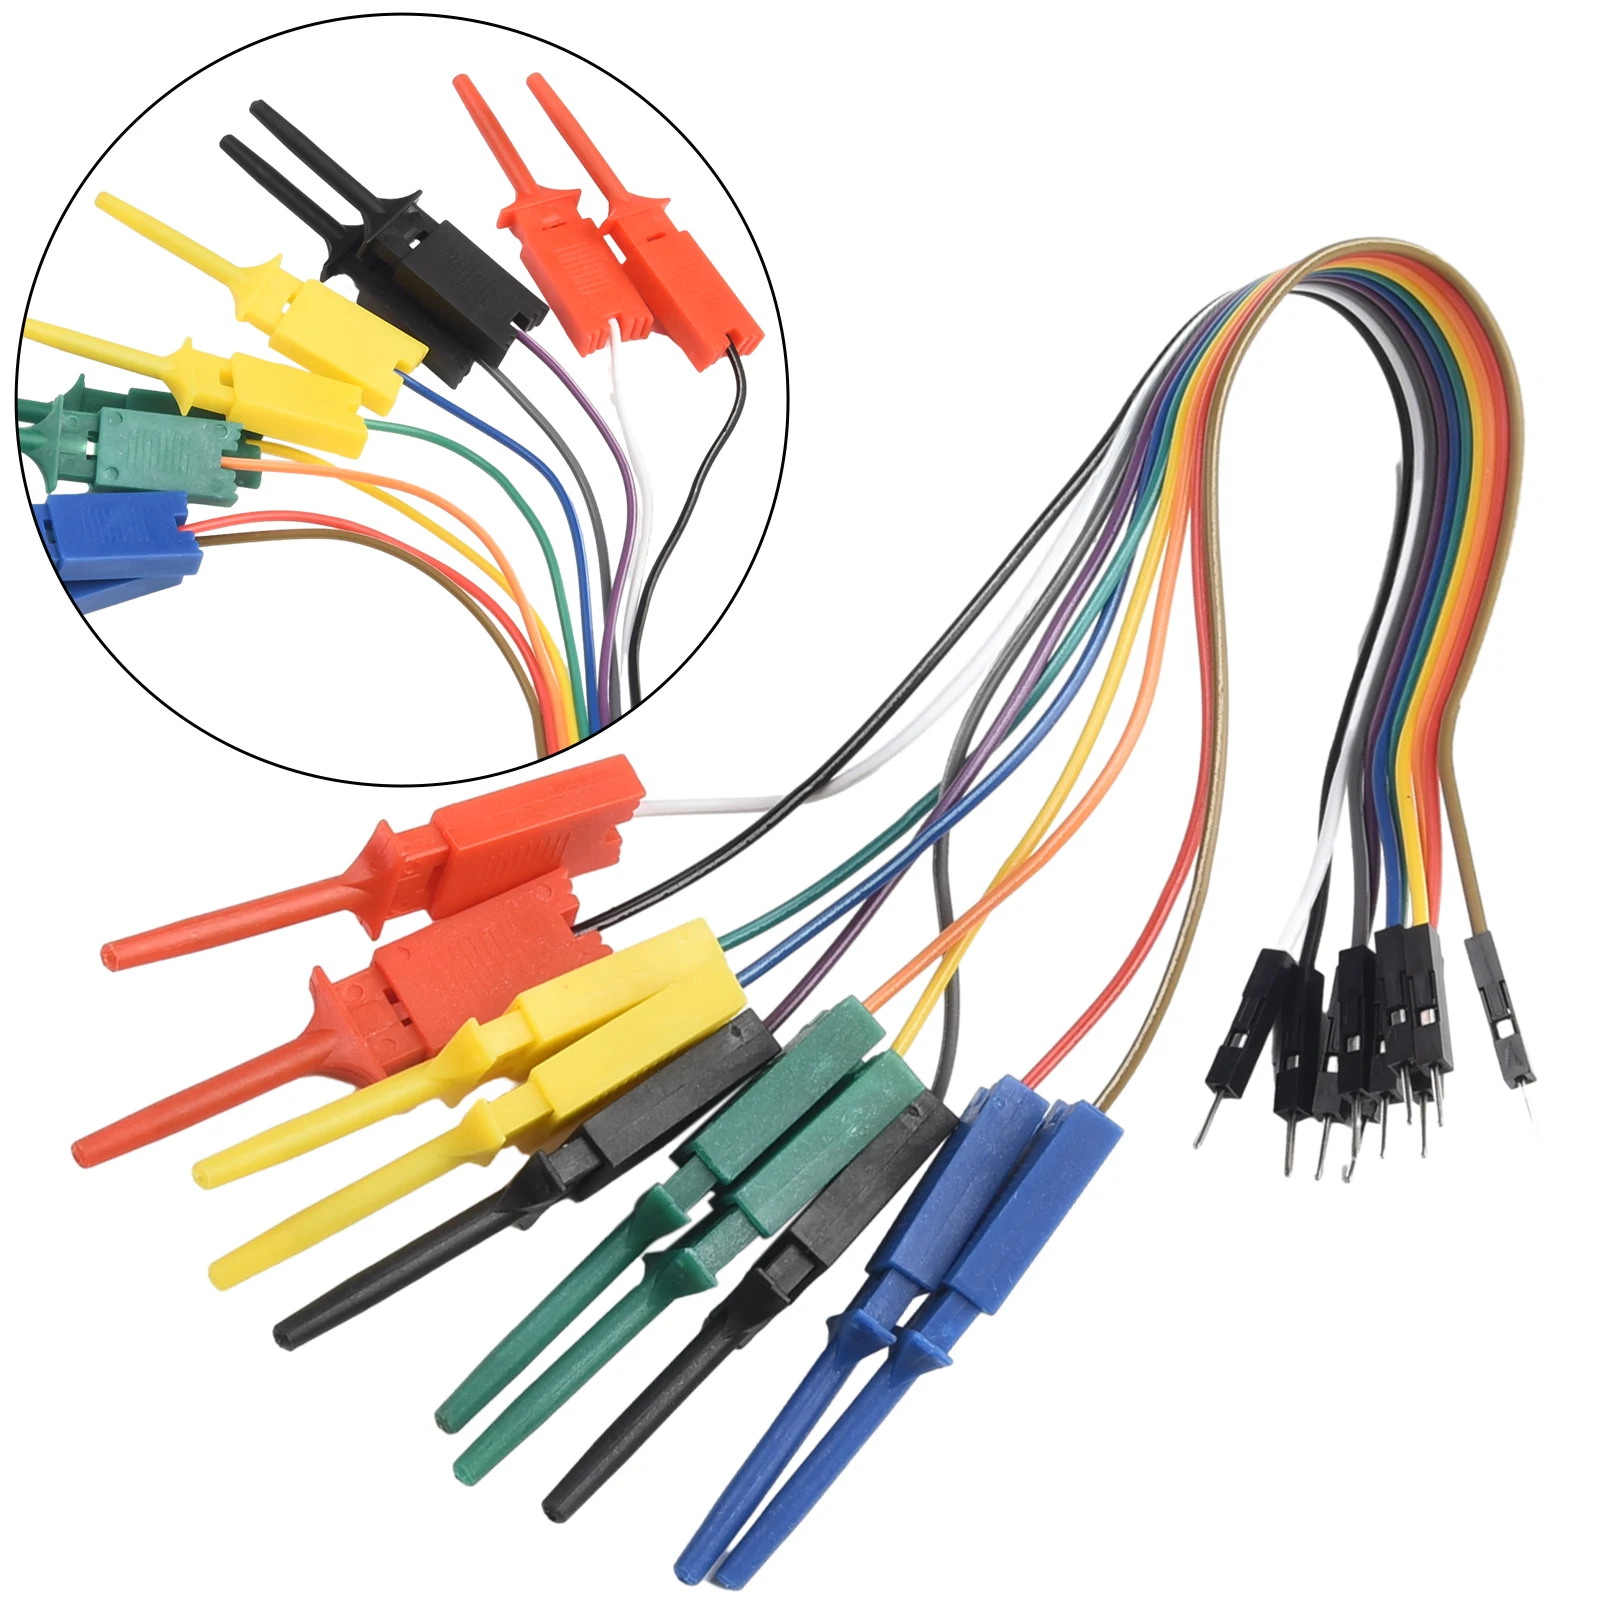 

20cm 10 Pins Logic Analyzer Cable Test Lead Hook Cable Clamp 5Color Probe Testing Electrical Equipment High Efficiency